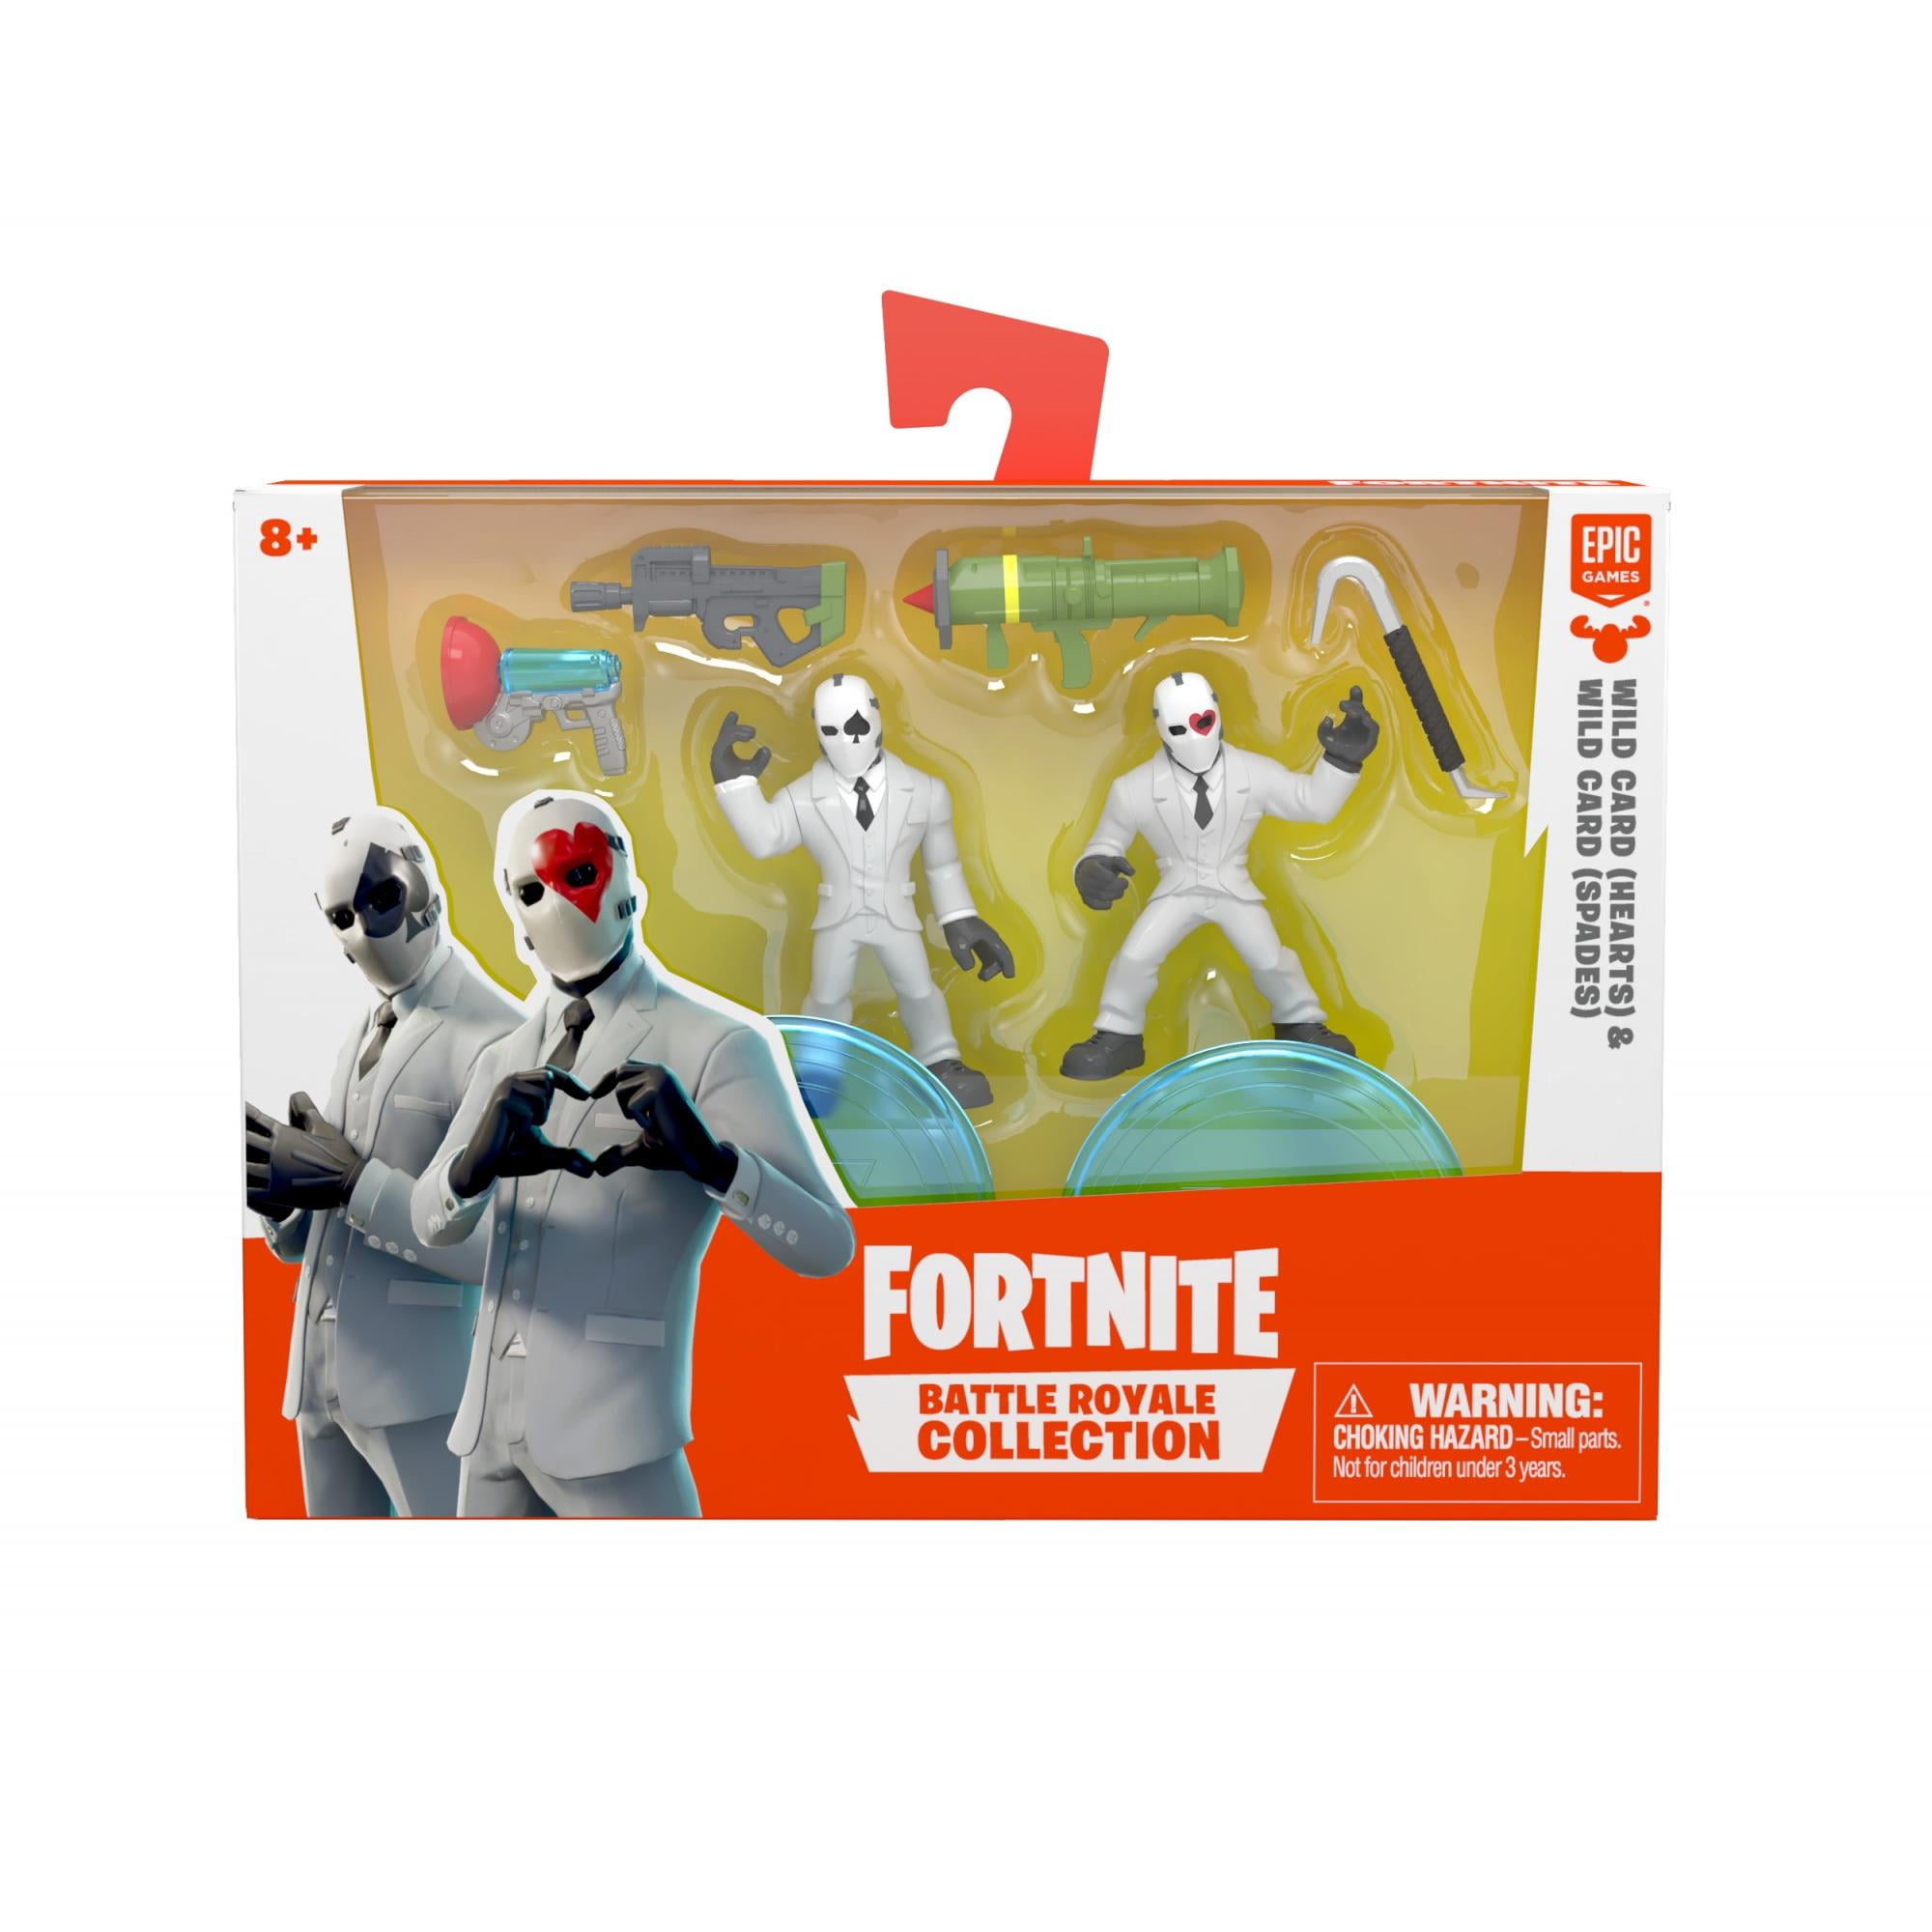 Fortnite Battle Royale Duo Pack, Wild Card Hearts Spades, Pack Of